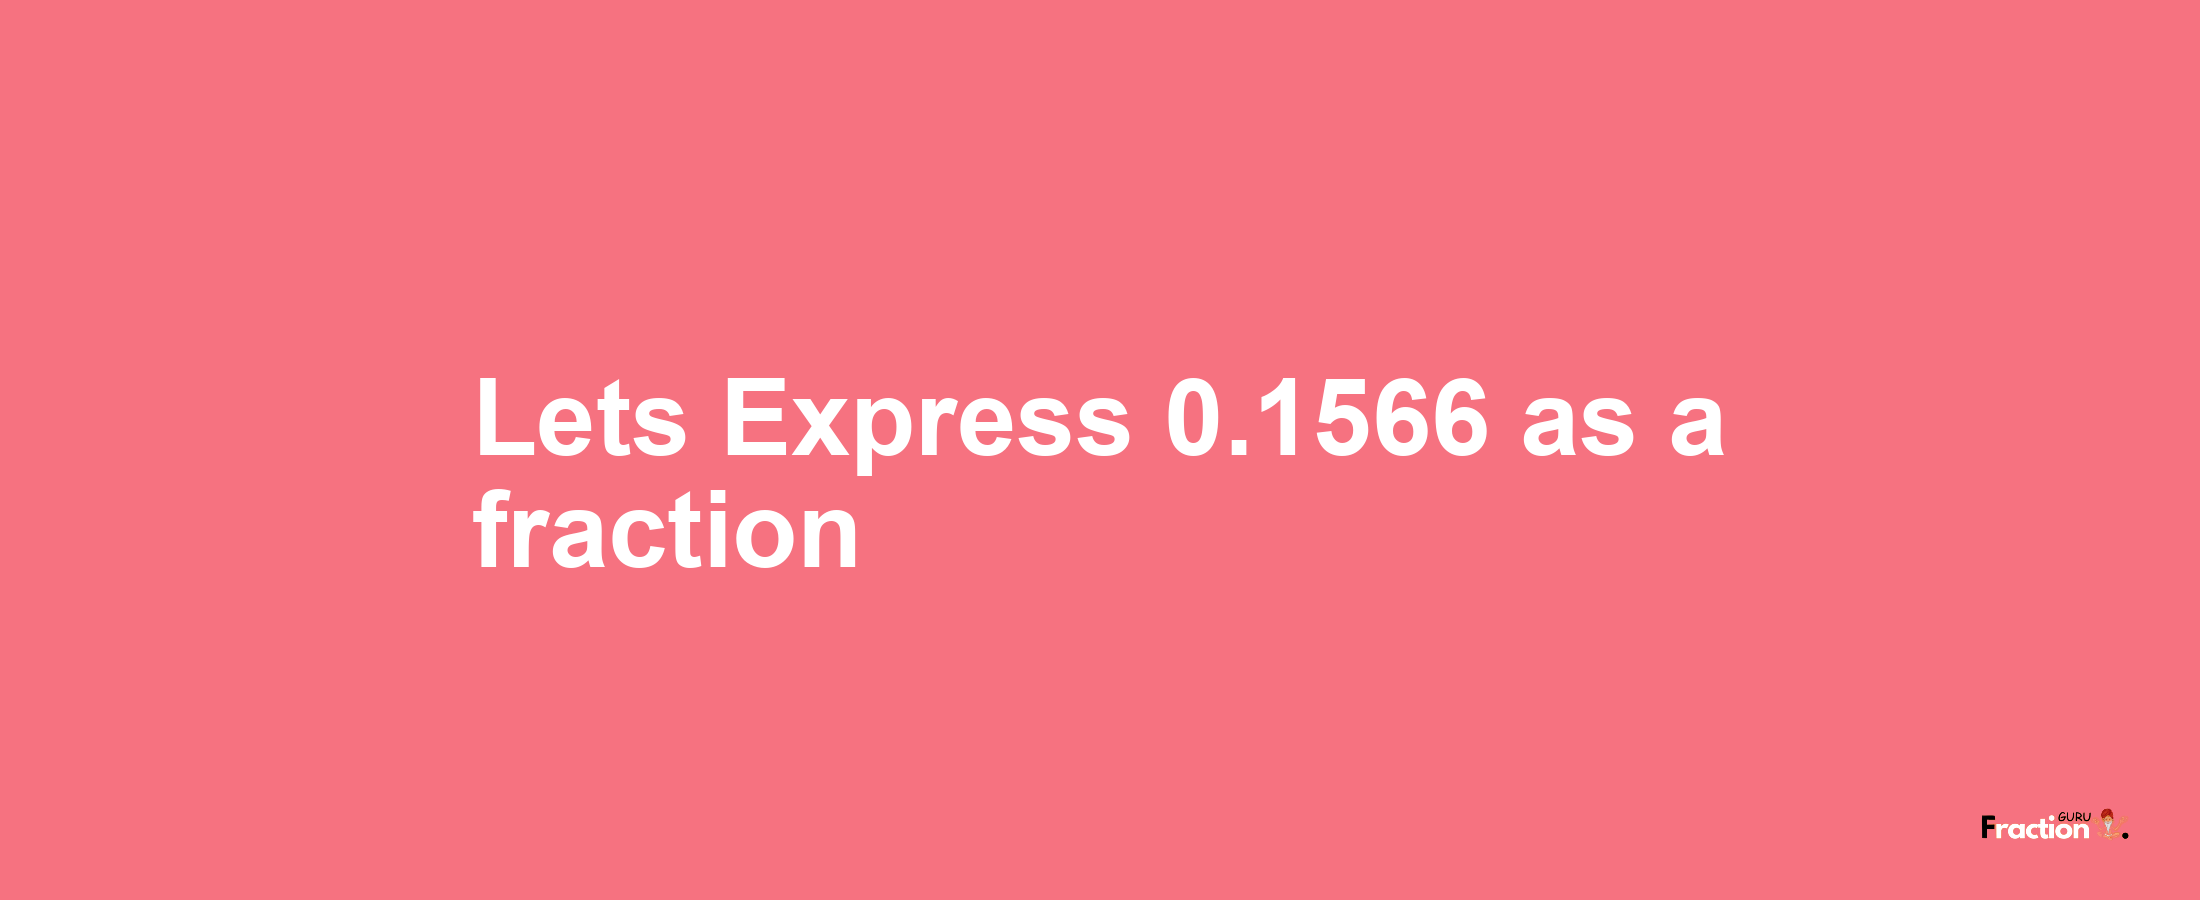 Lets Express 0.1566 as afraction